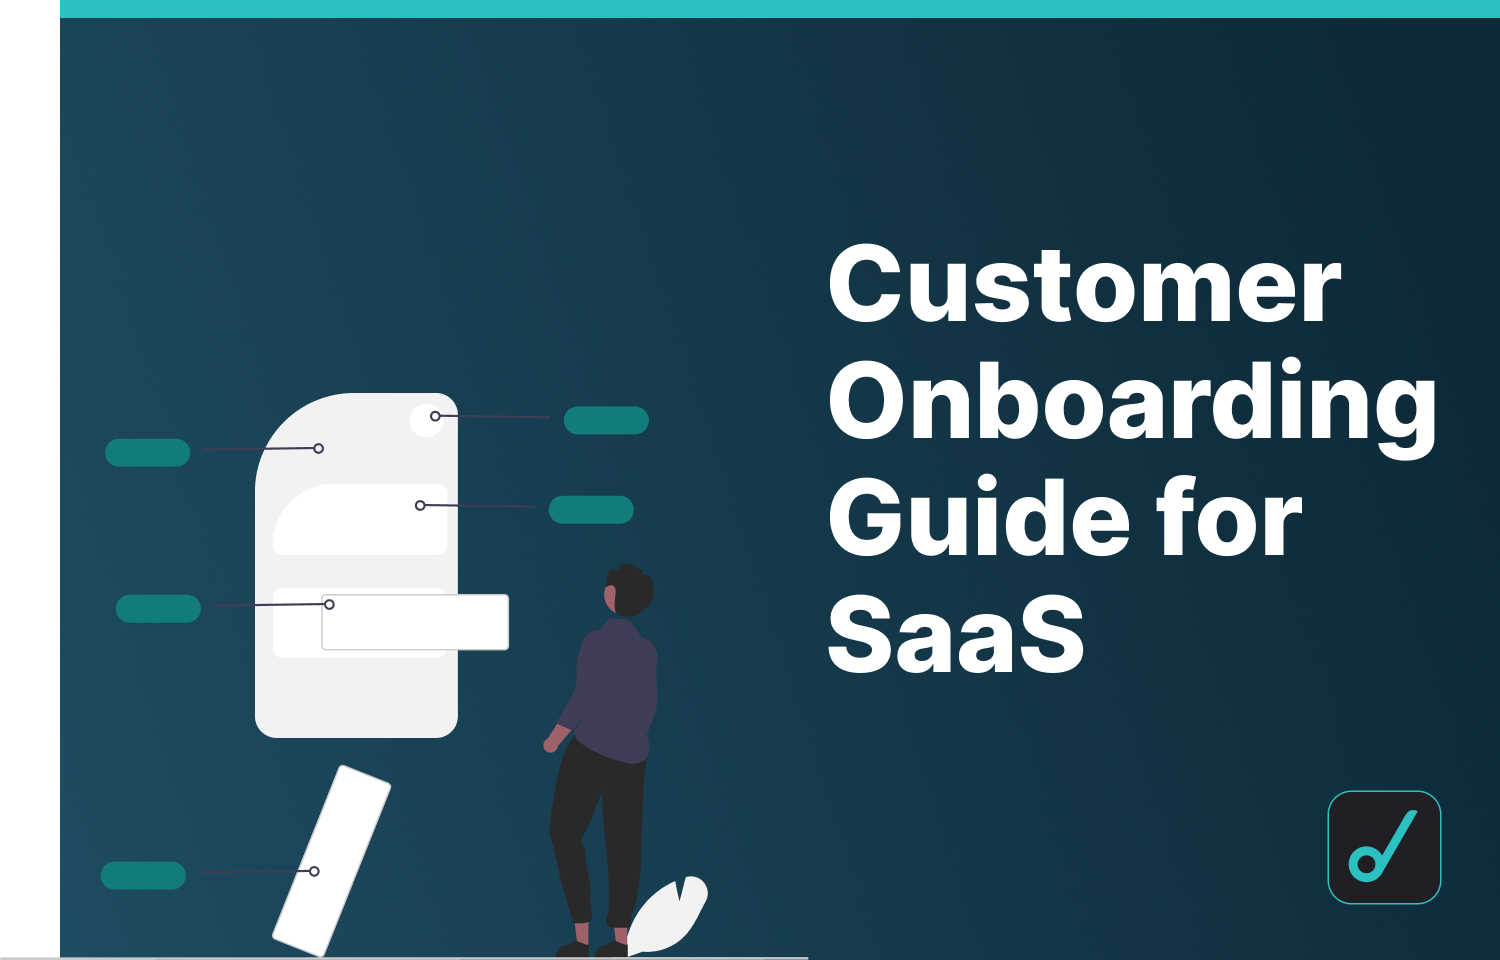 Ultimate Guide To Customer Onboarding: Tips, Tricks, and Metrics